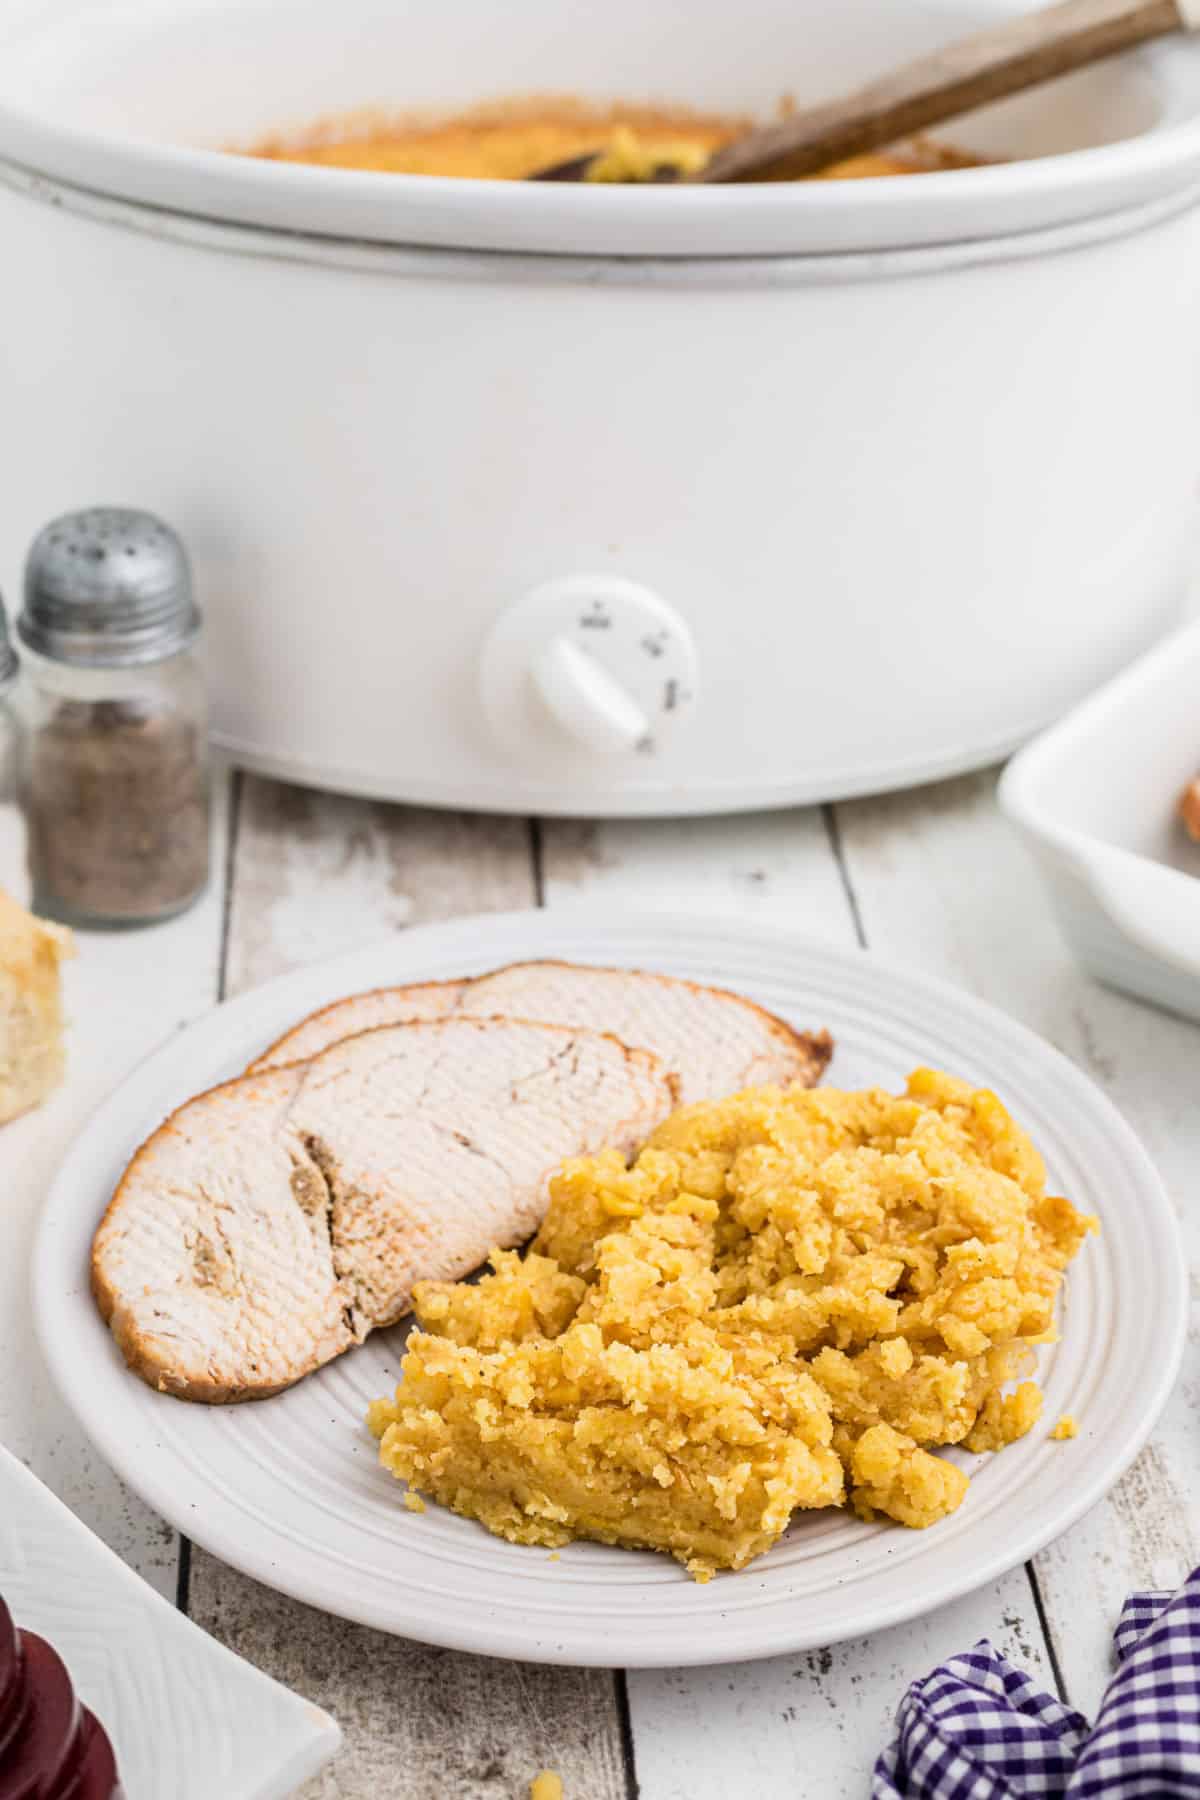 A plate of corn casserole with some slices of turkey behind with a crock pot.